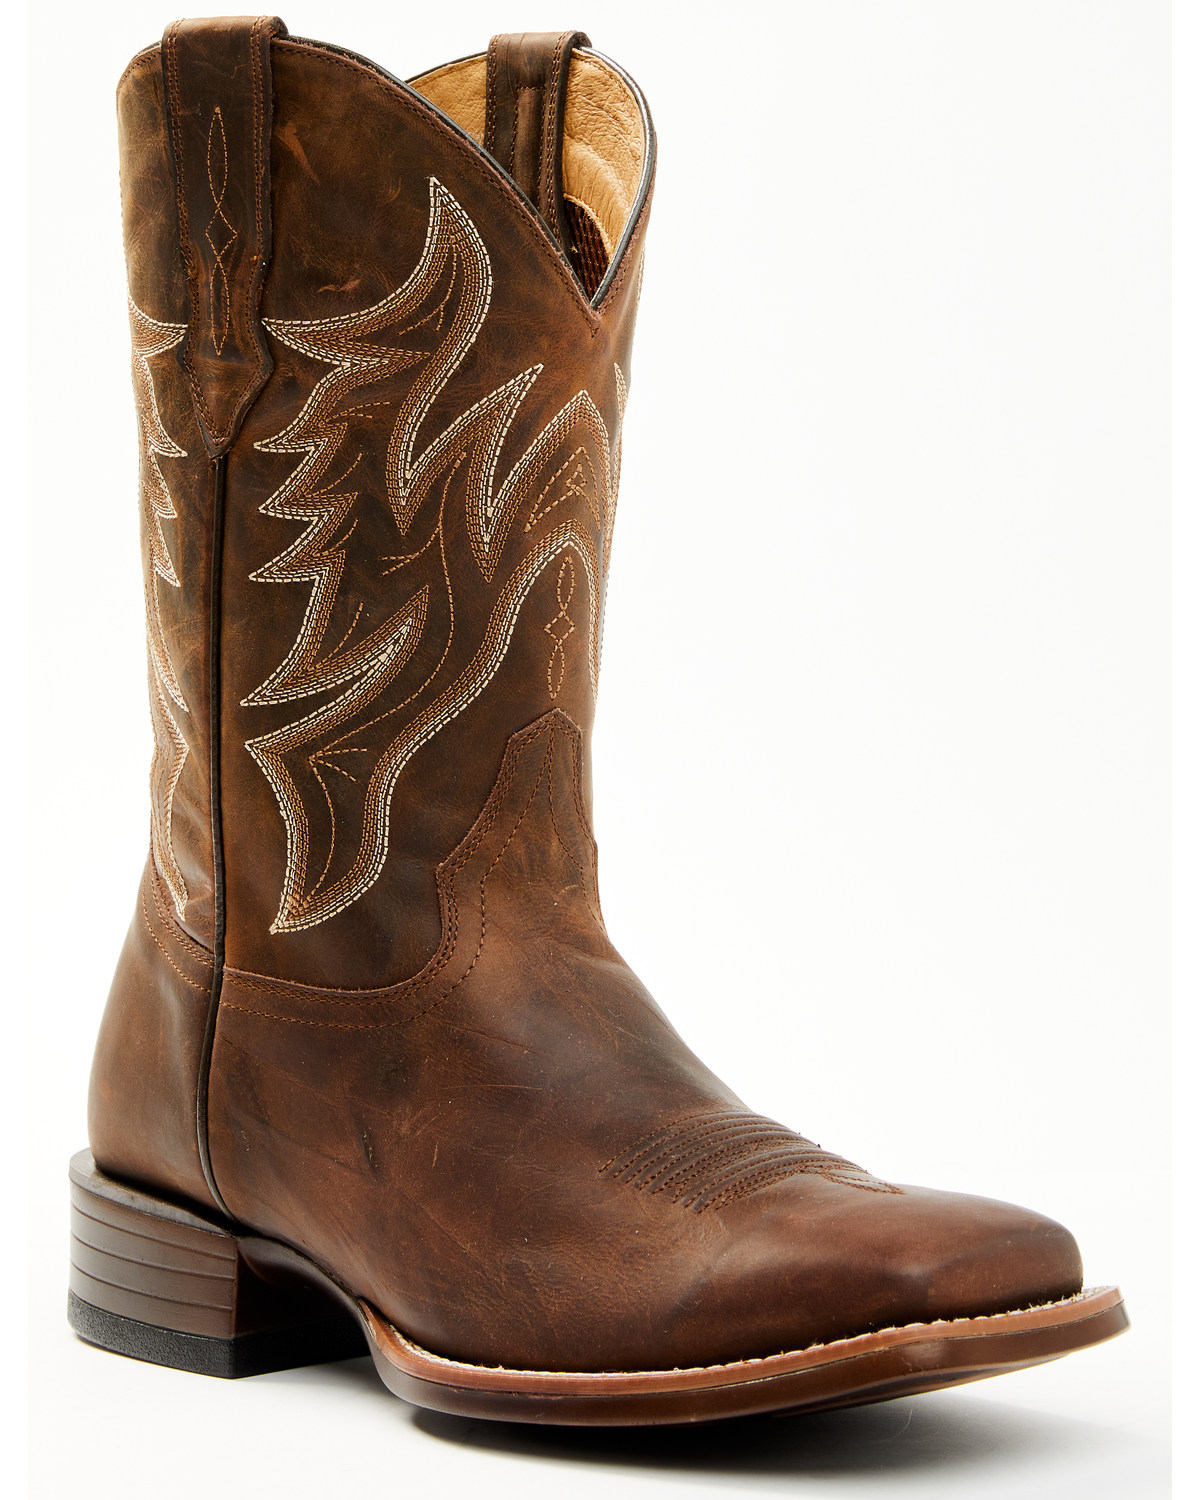 Cody James Men's Hoverfly Performance Western Boots - Broad Square Toe